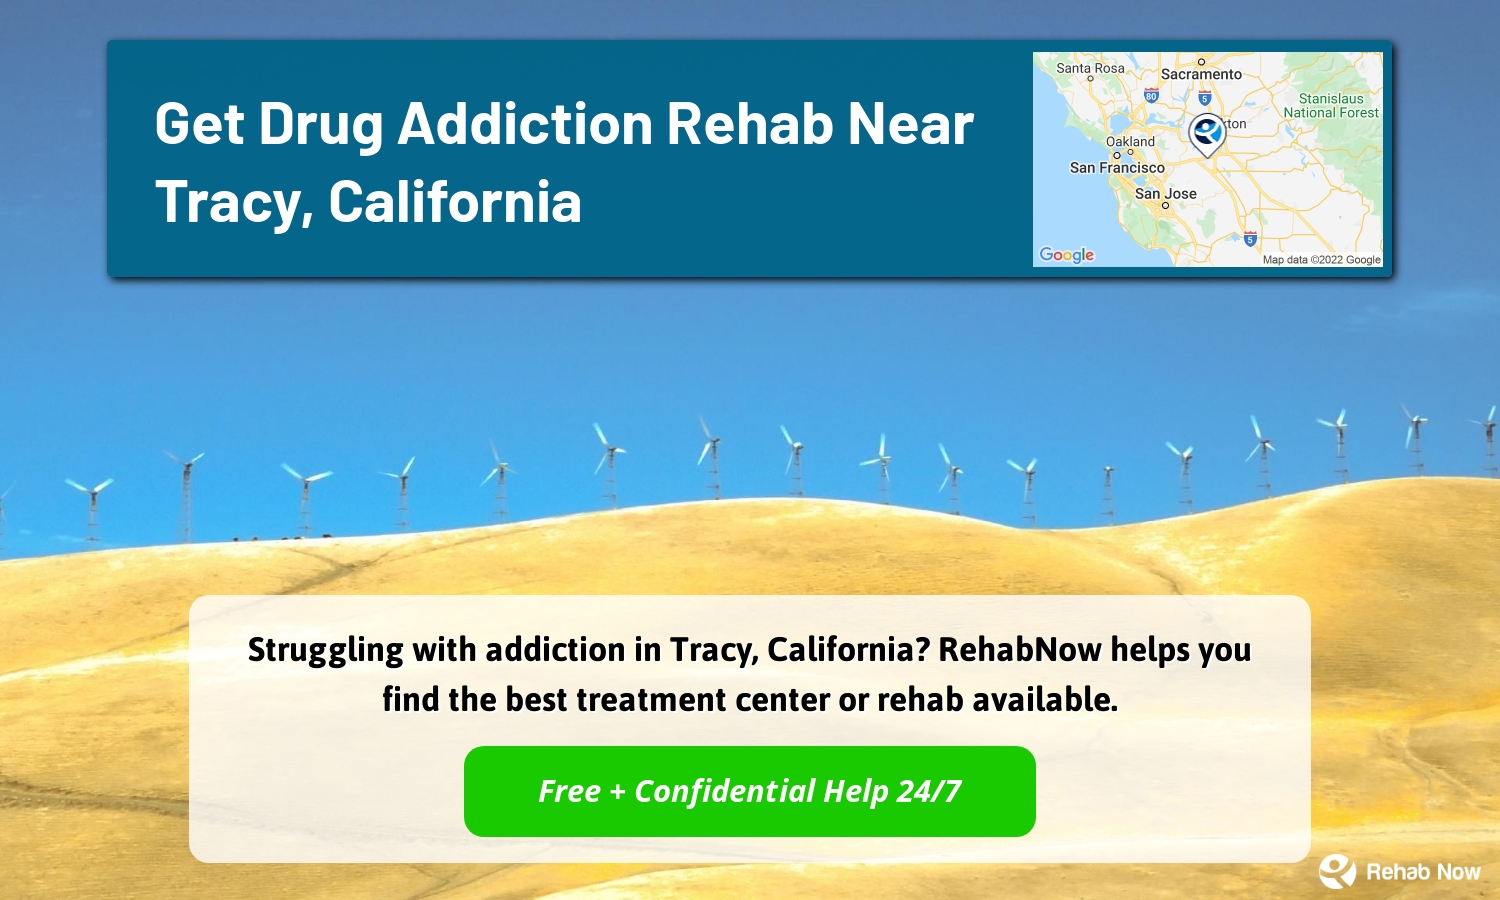 Struggling with addiction in Tracy, California? RehabNow helps you find the best treatment center or rehab available.